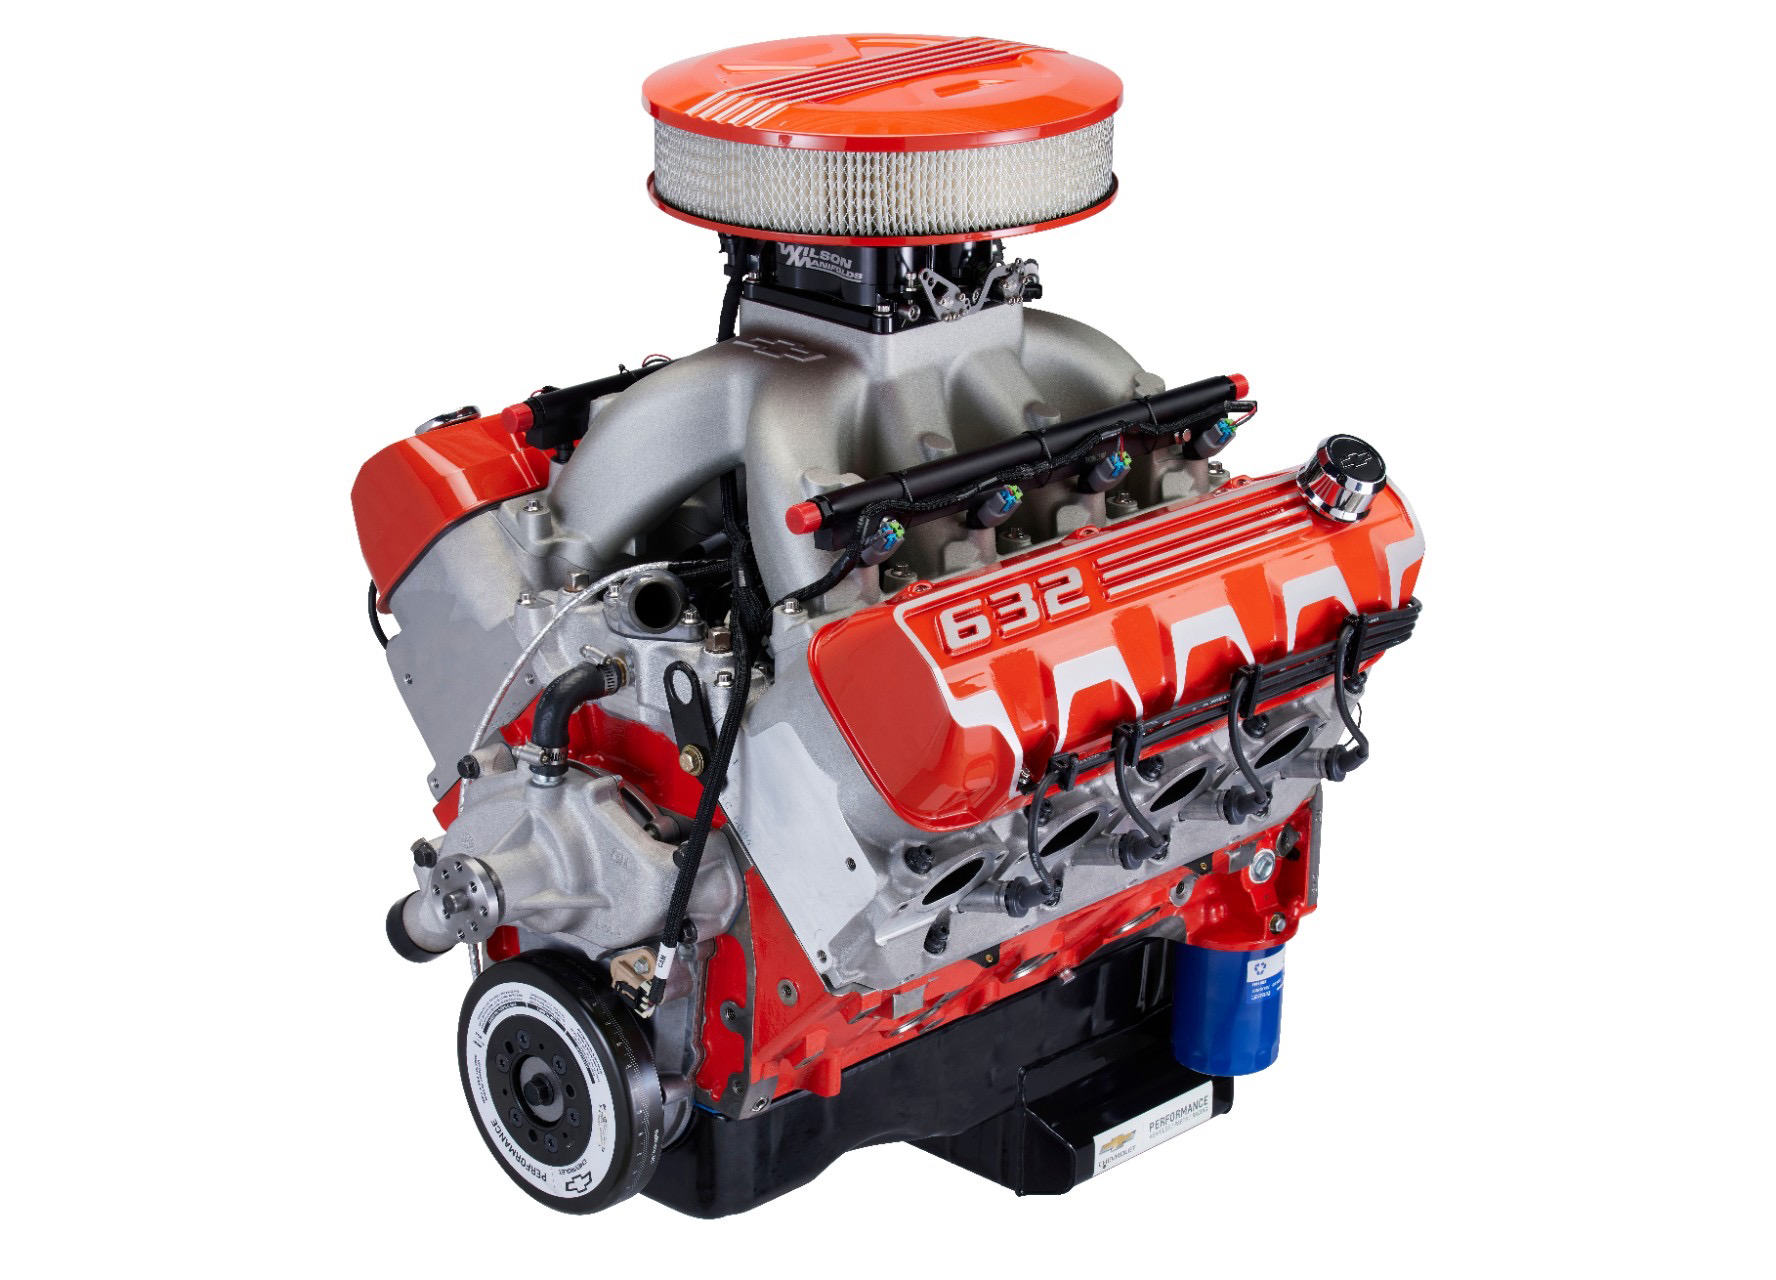 Chevrolet debuts its biggest, most powerful crate engine: 10.4L ZZ632 V8